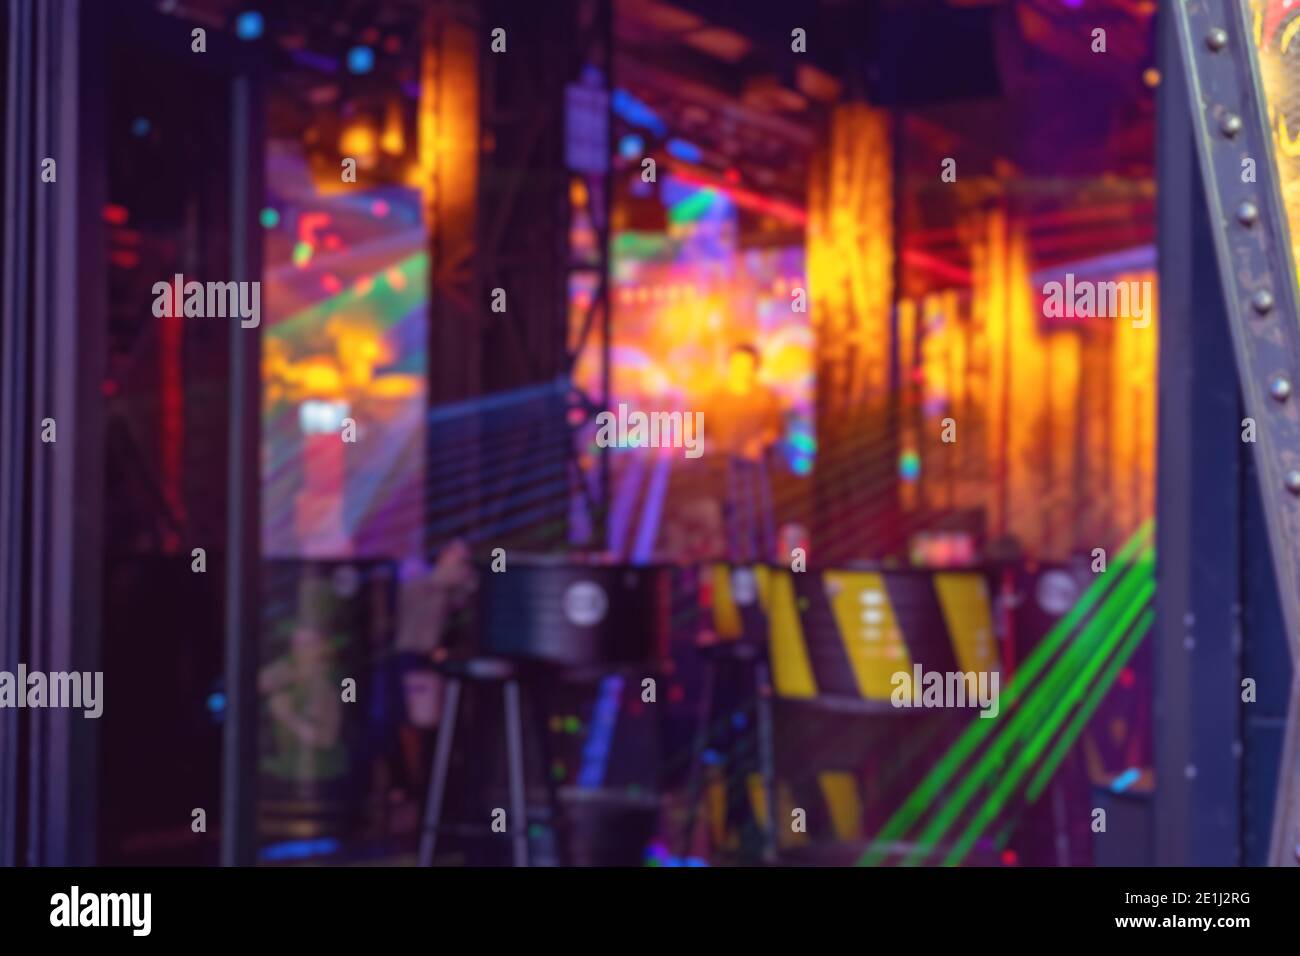 Blurred night club with disco lights.  Abstract defocused background of colorful interior. DJ plays music from the stage Stock Photo